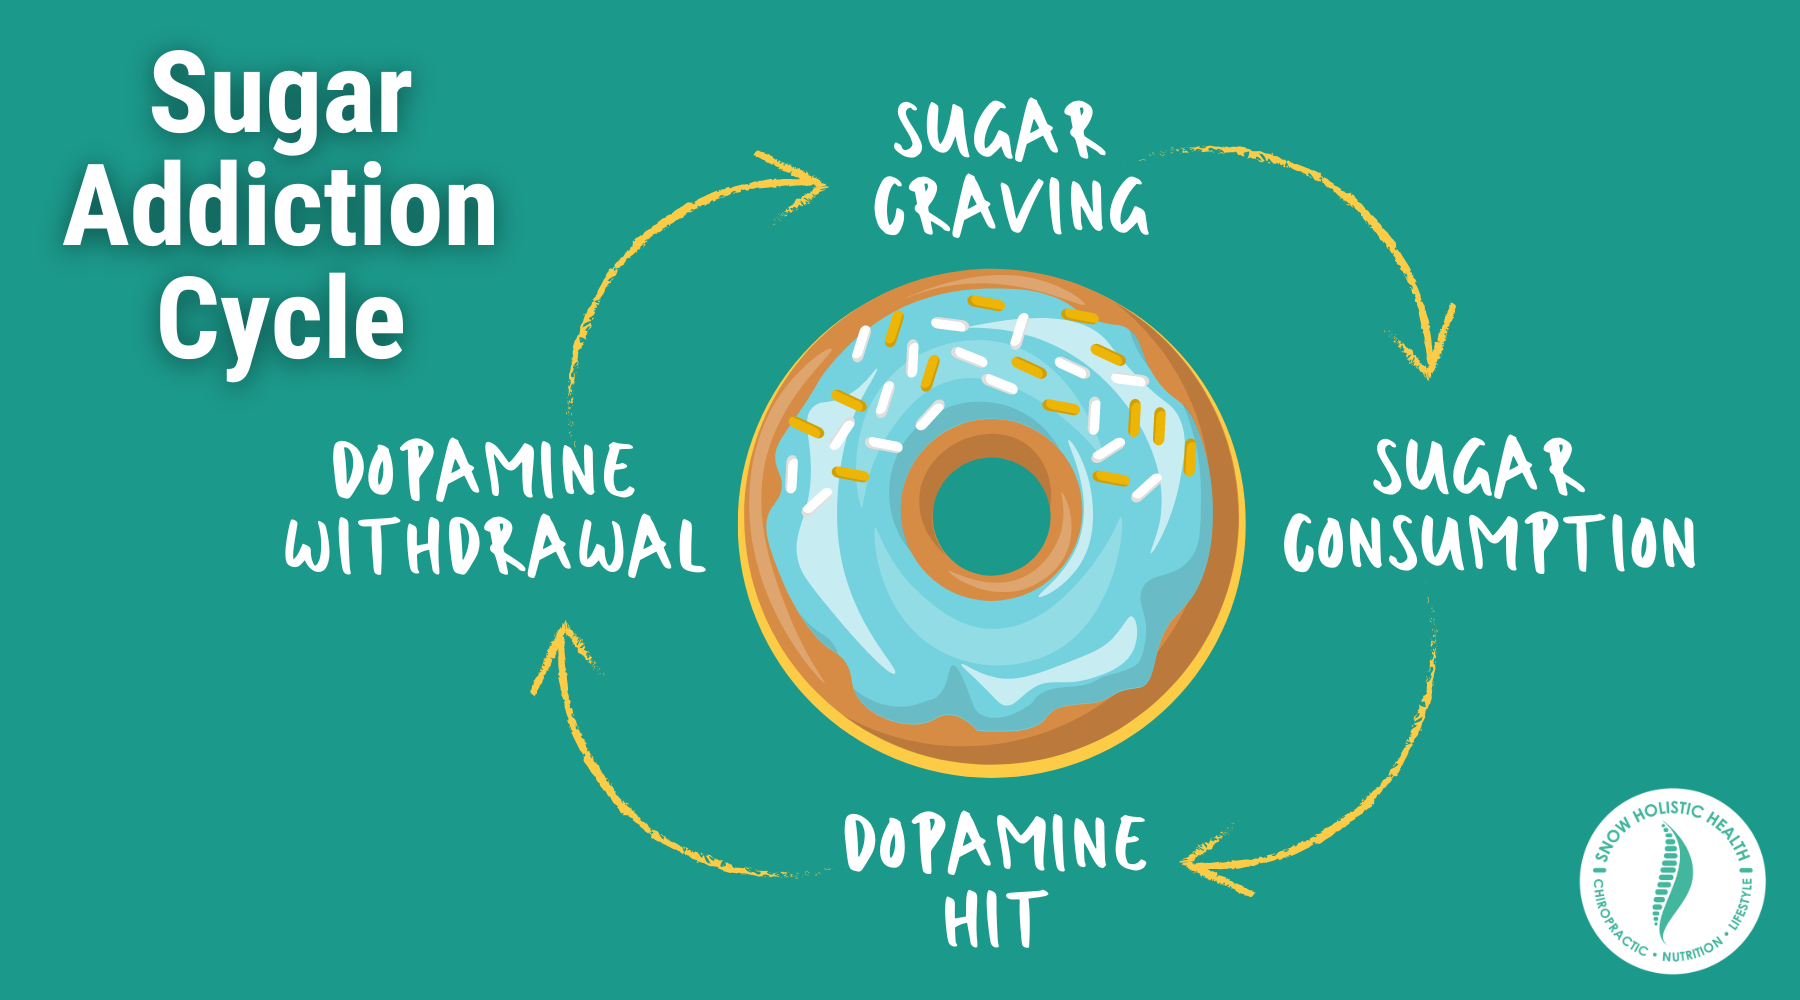 Sugar addiction cycle circle graph. Sugar craving leads to sugar consumption leads to dopamine hit leads to dopamine withdrawal